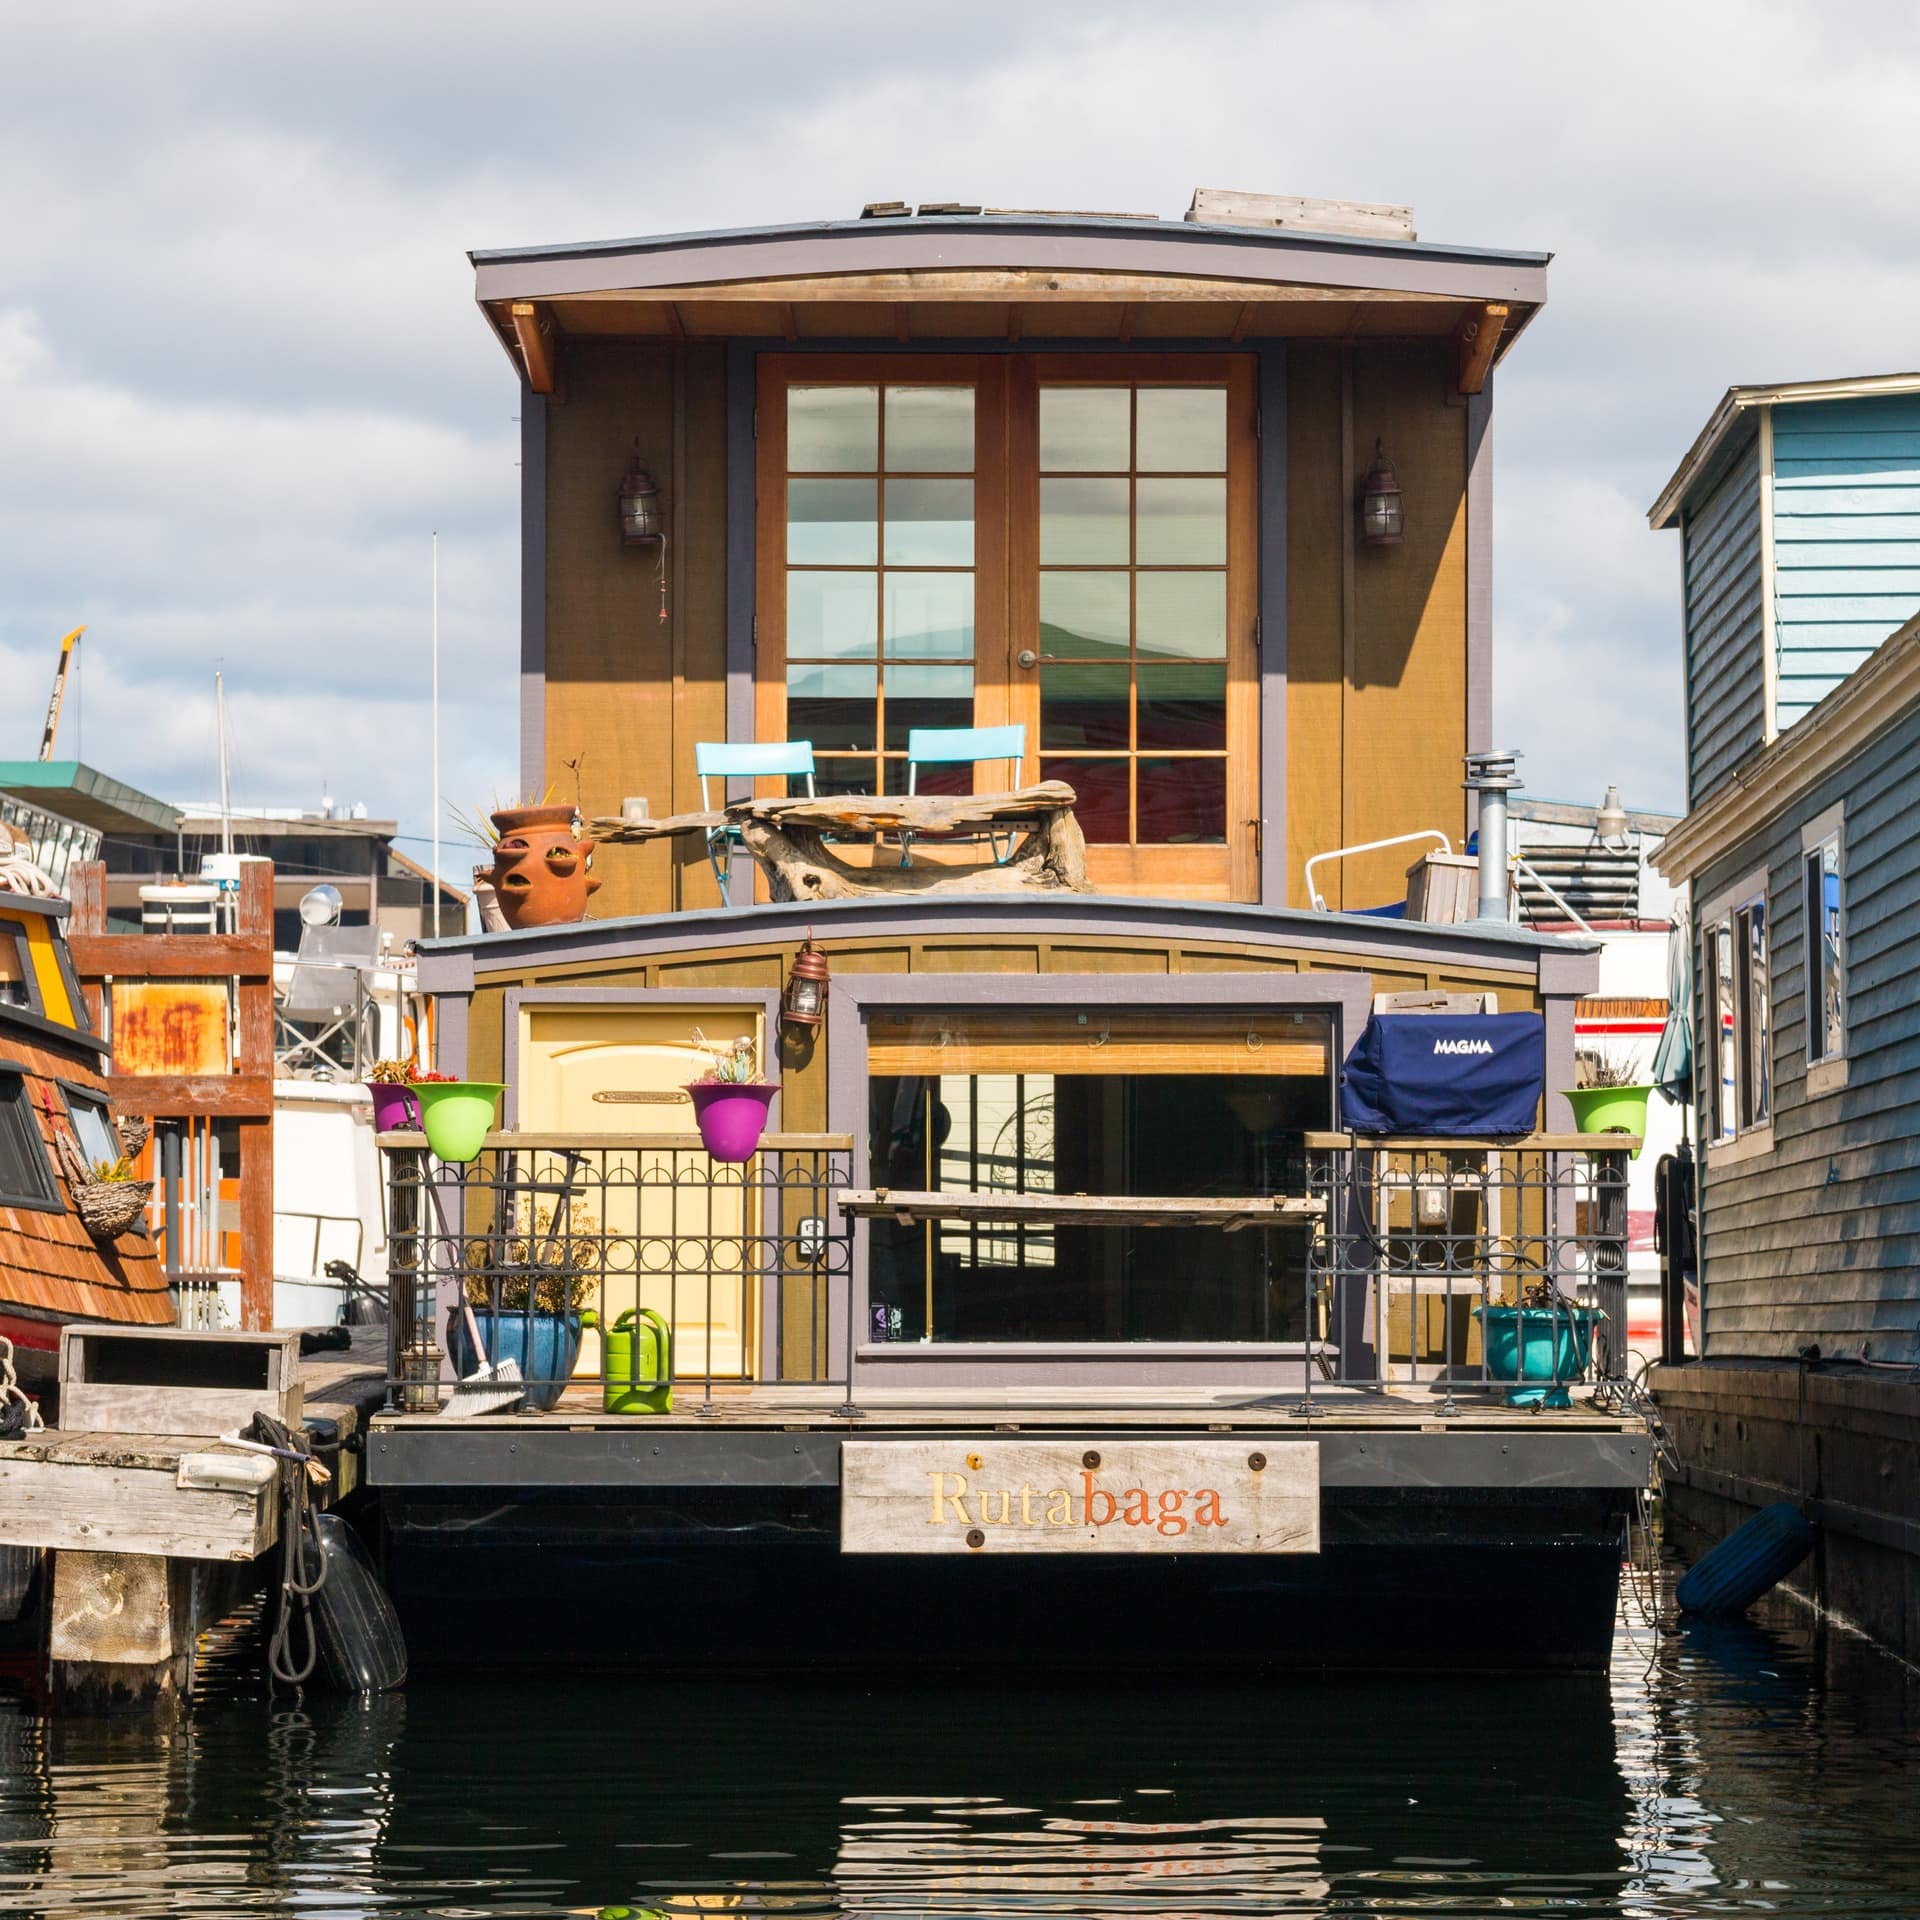 A houseboat moored in the Westlake area of Lake Union